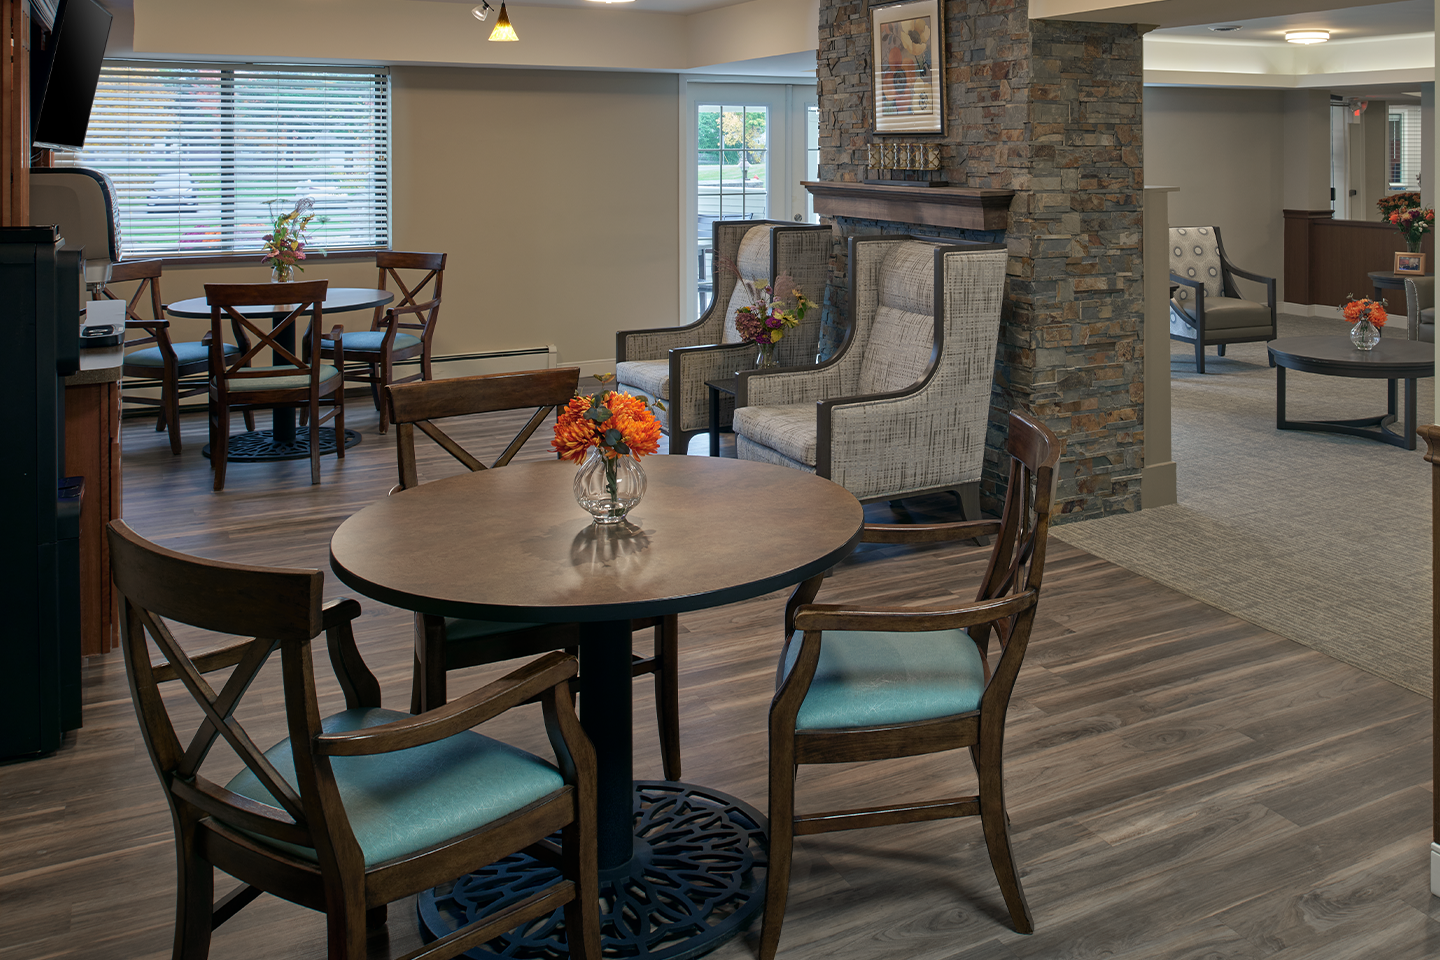 Dining bistro area of American House Grand Blanc, a senior living community.